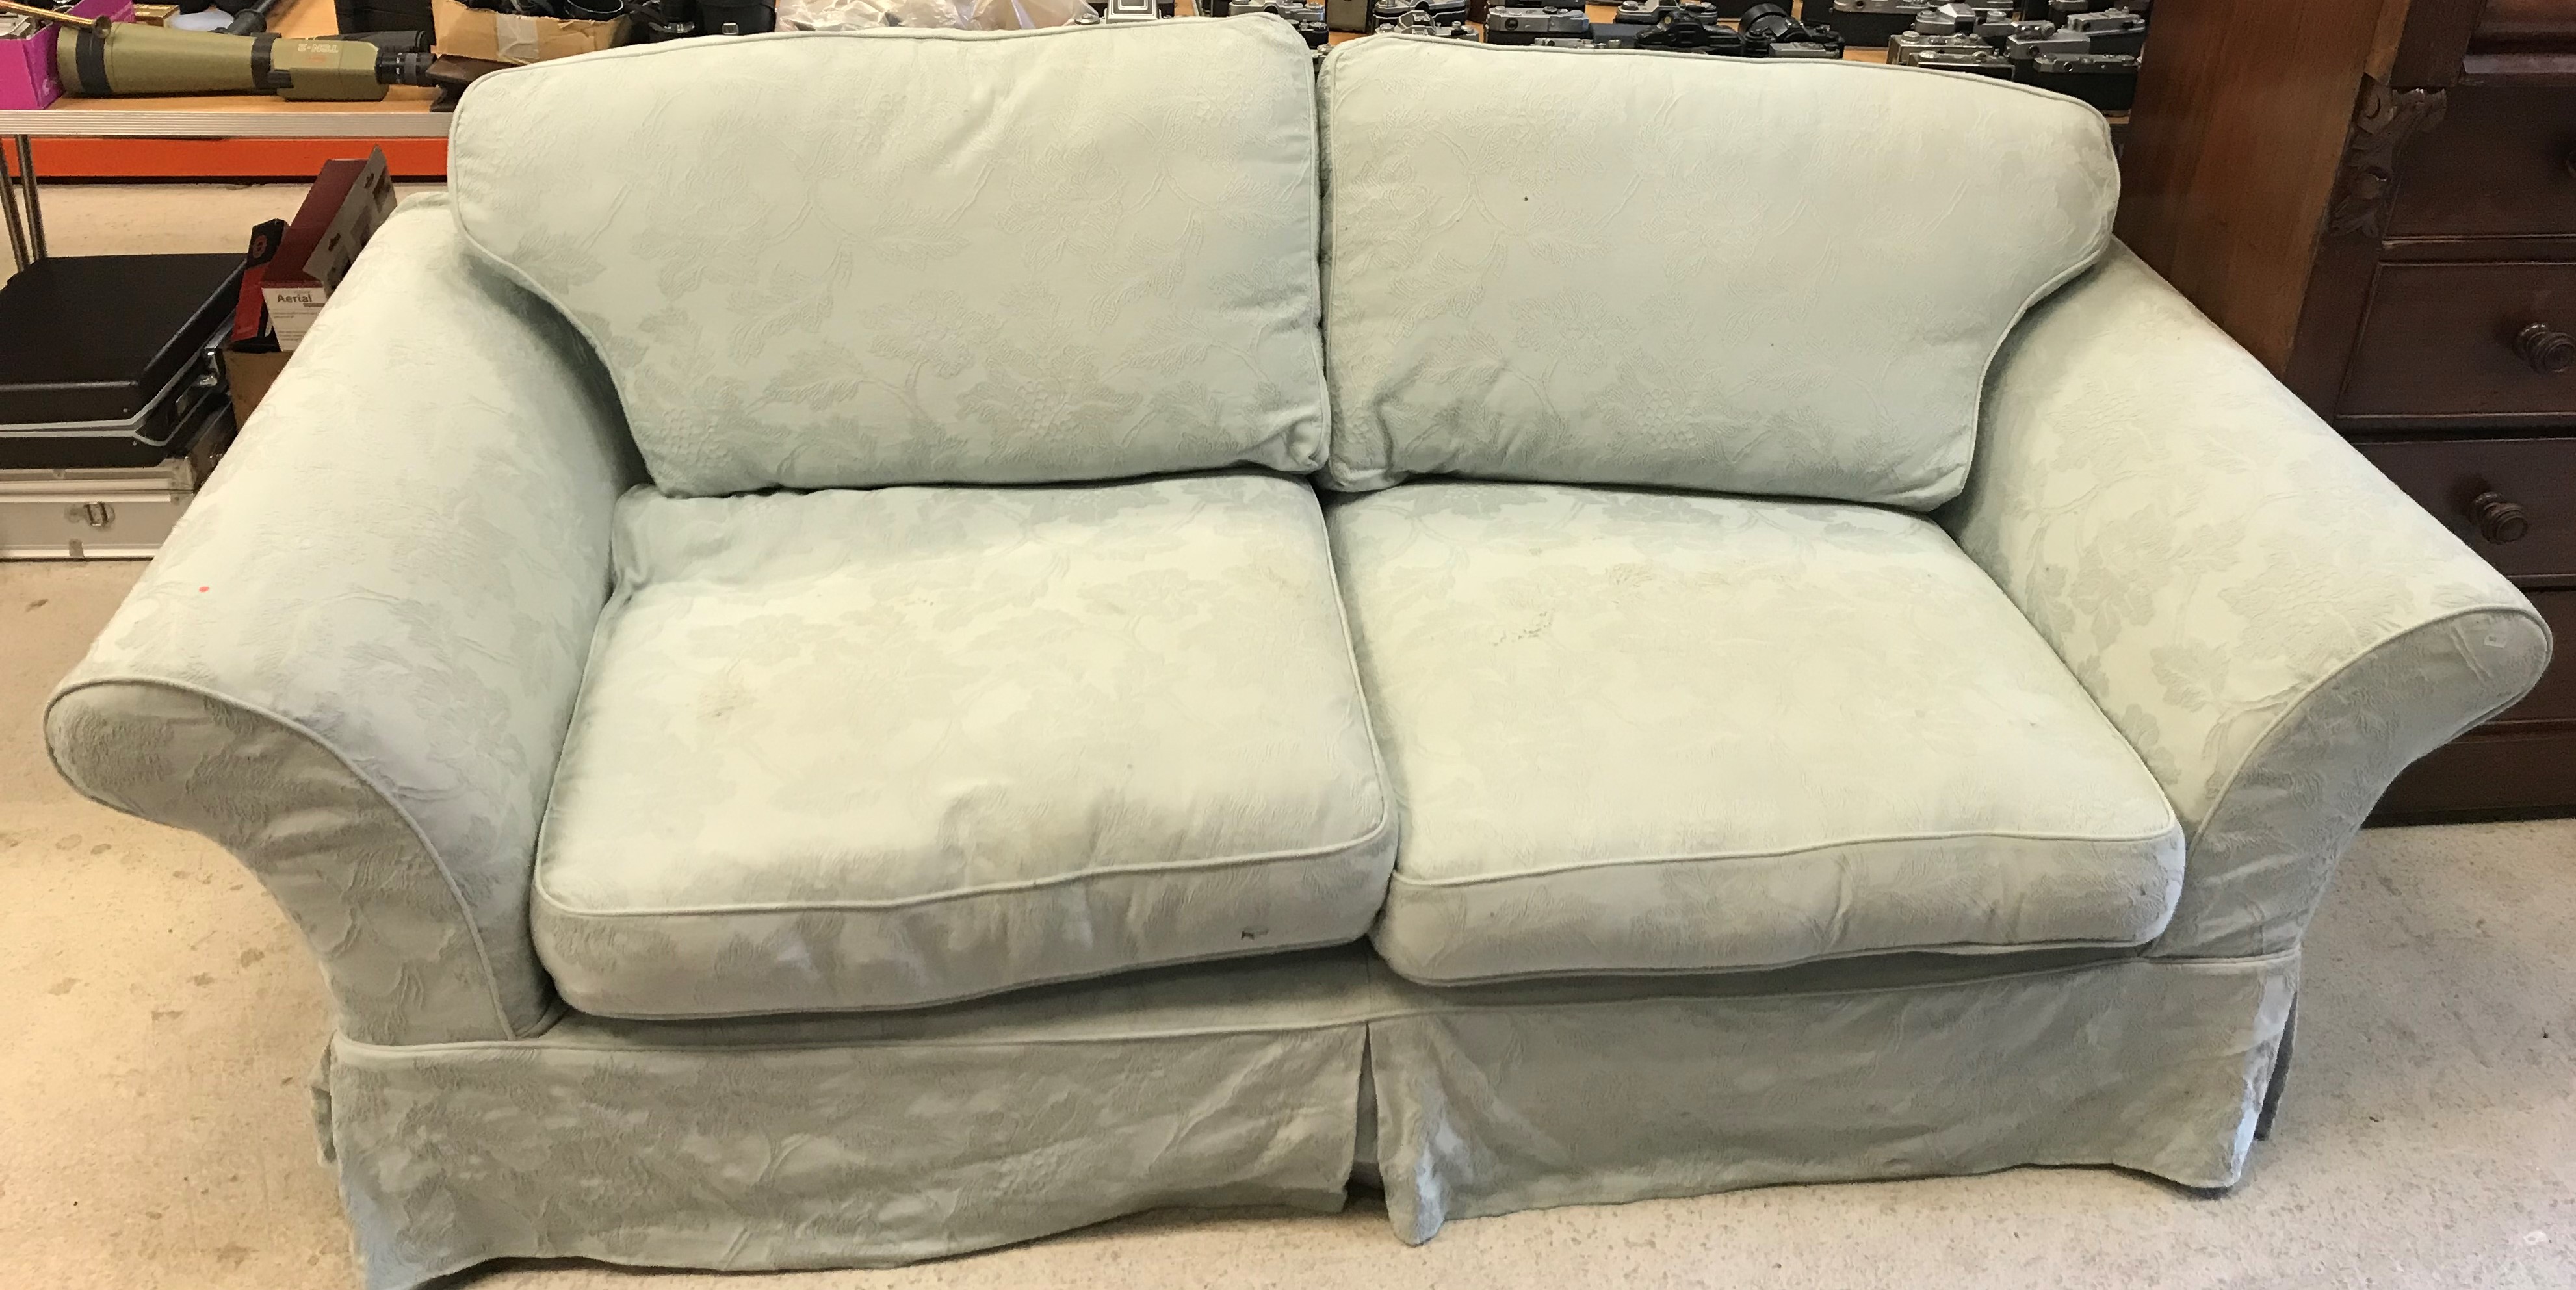 A modern upholstered scroll arm sofa with pale blue/green floral pattern loose covers 220 cm wide x